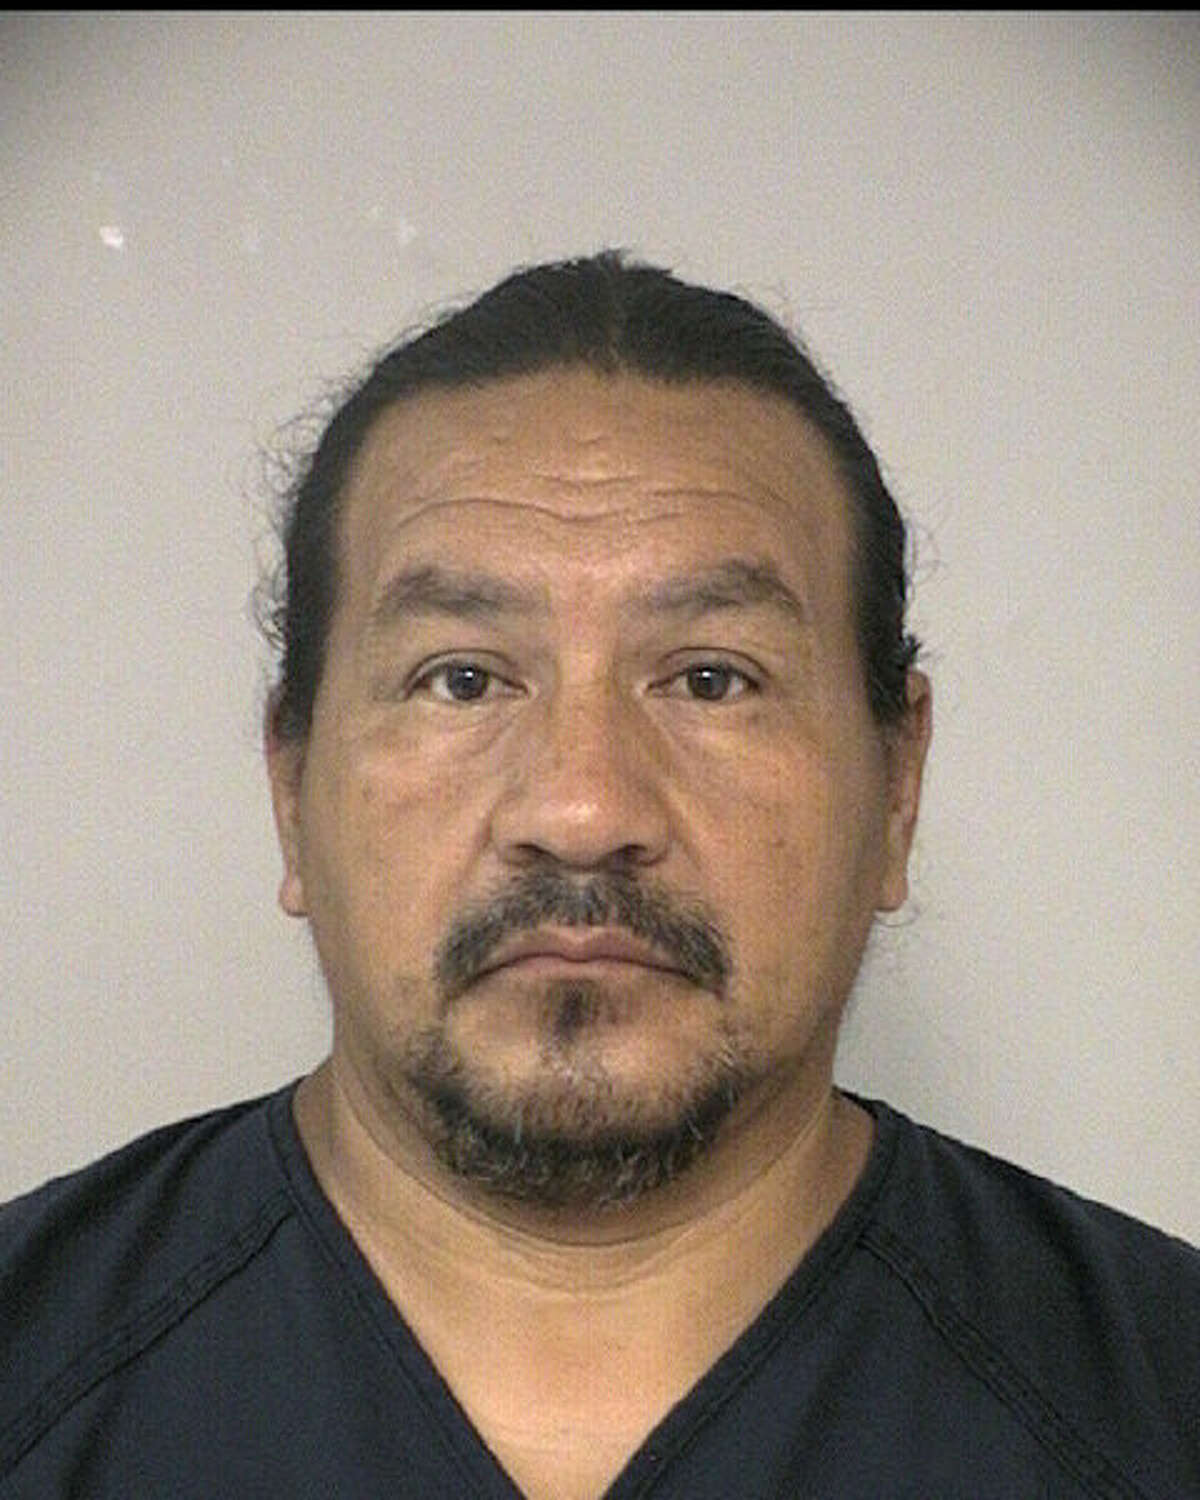 Miguel Fonseca is charged with resisting arrest in Fort Bend County on July 8, 2018. He is currently in the jail with bond set at $1,000, plus fines for two previous warrants for speeding and failure to appear.